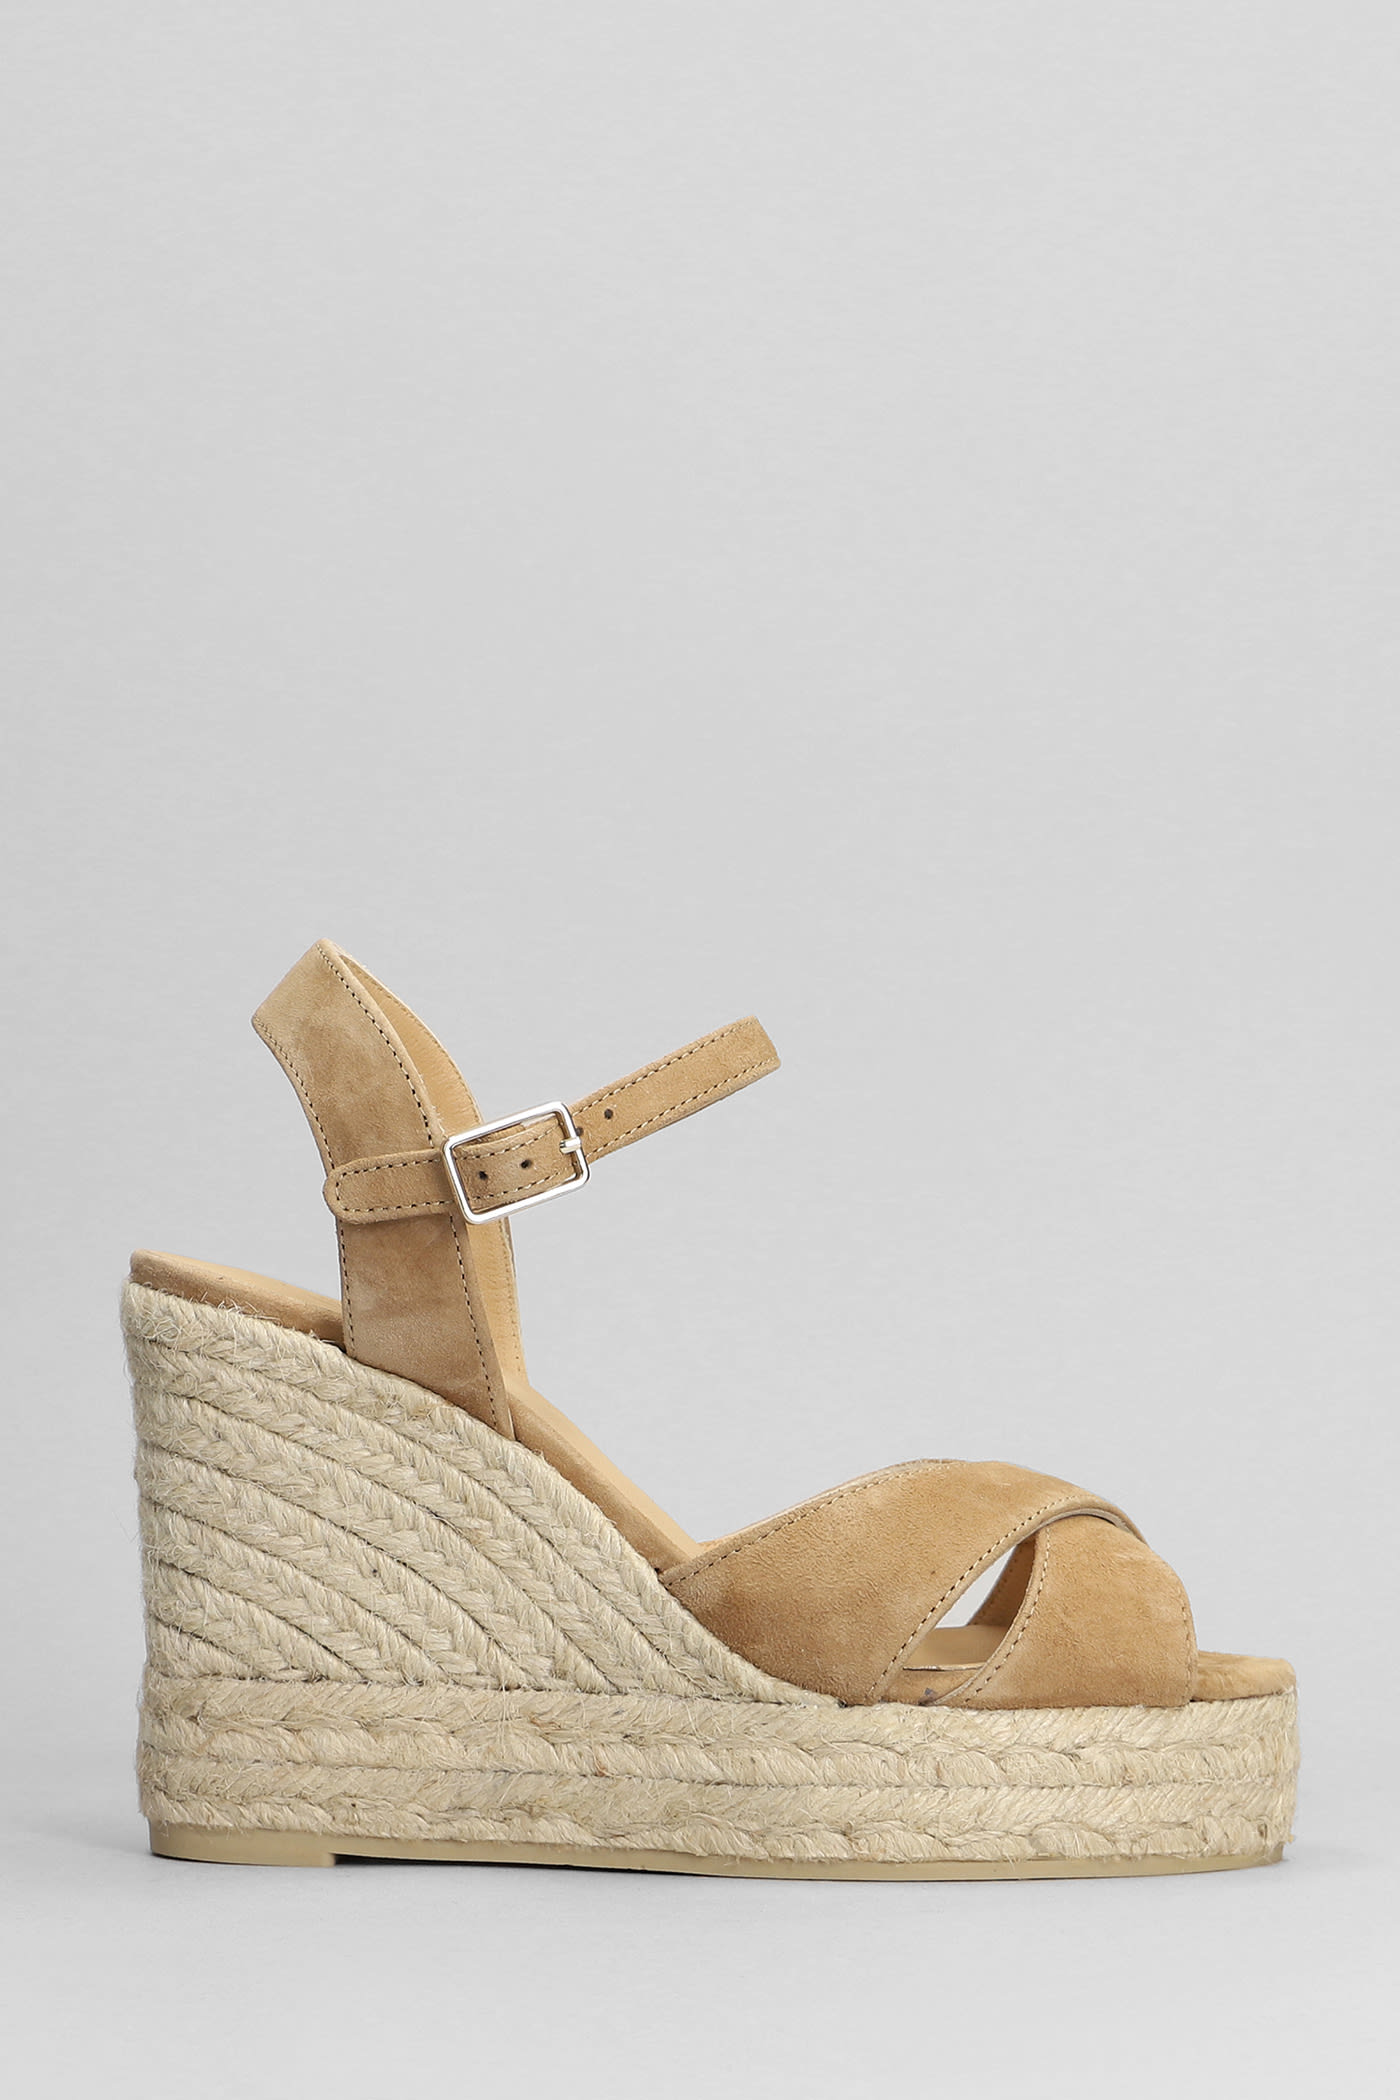 Castañer Blaudell-8ed-007 Wedges In Leather Color Suede